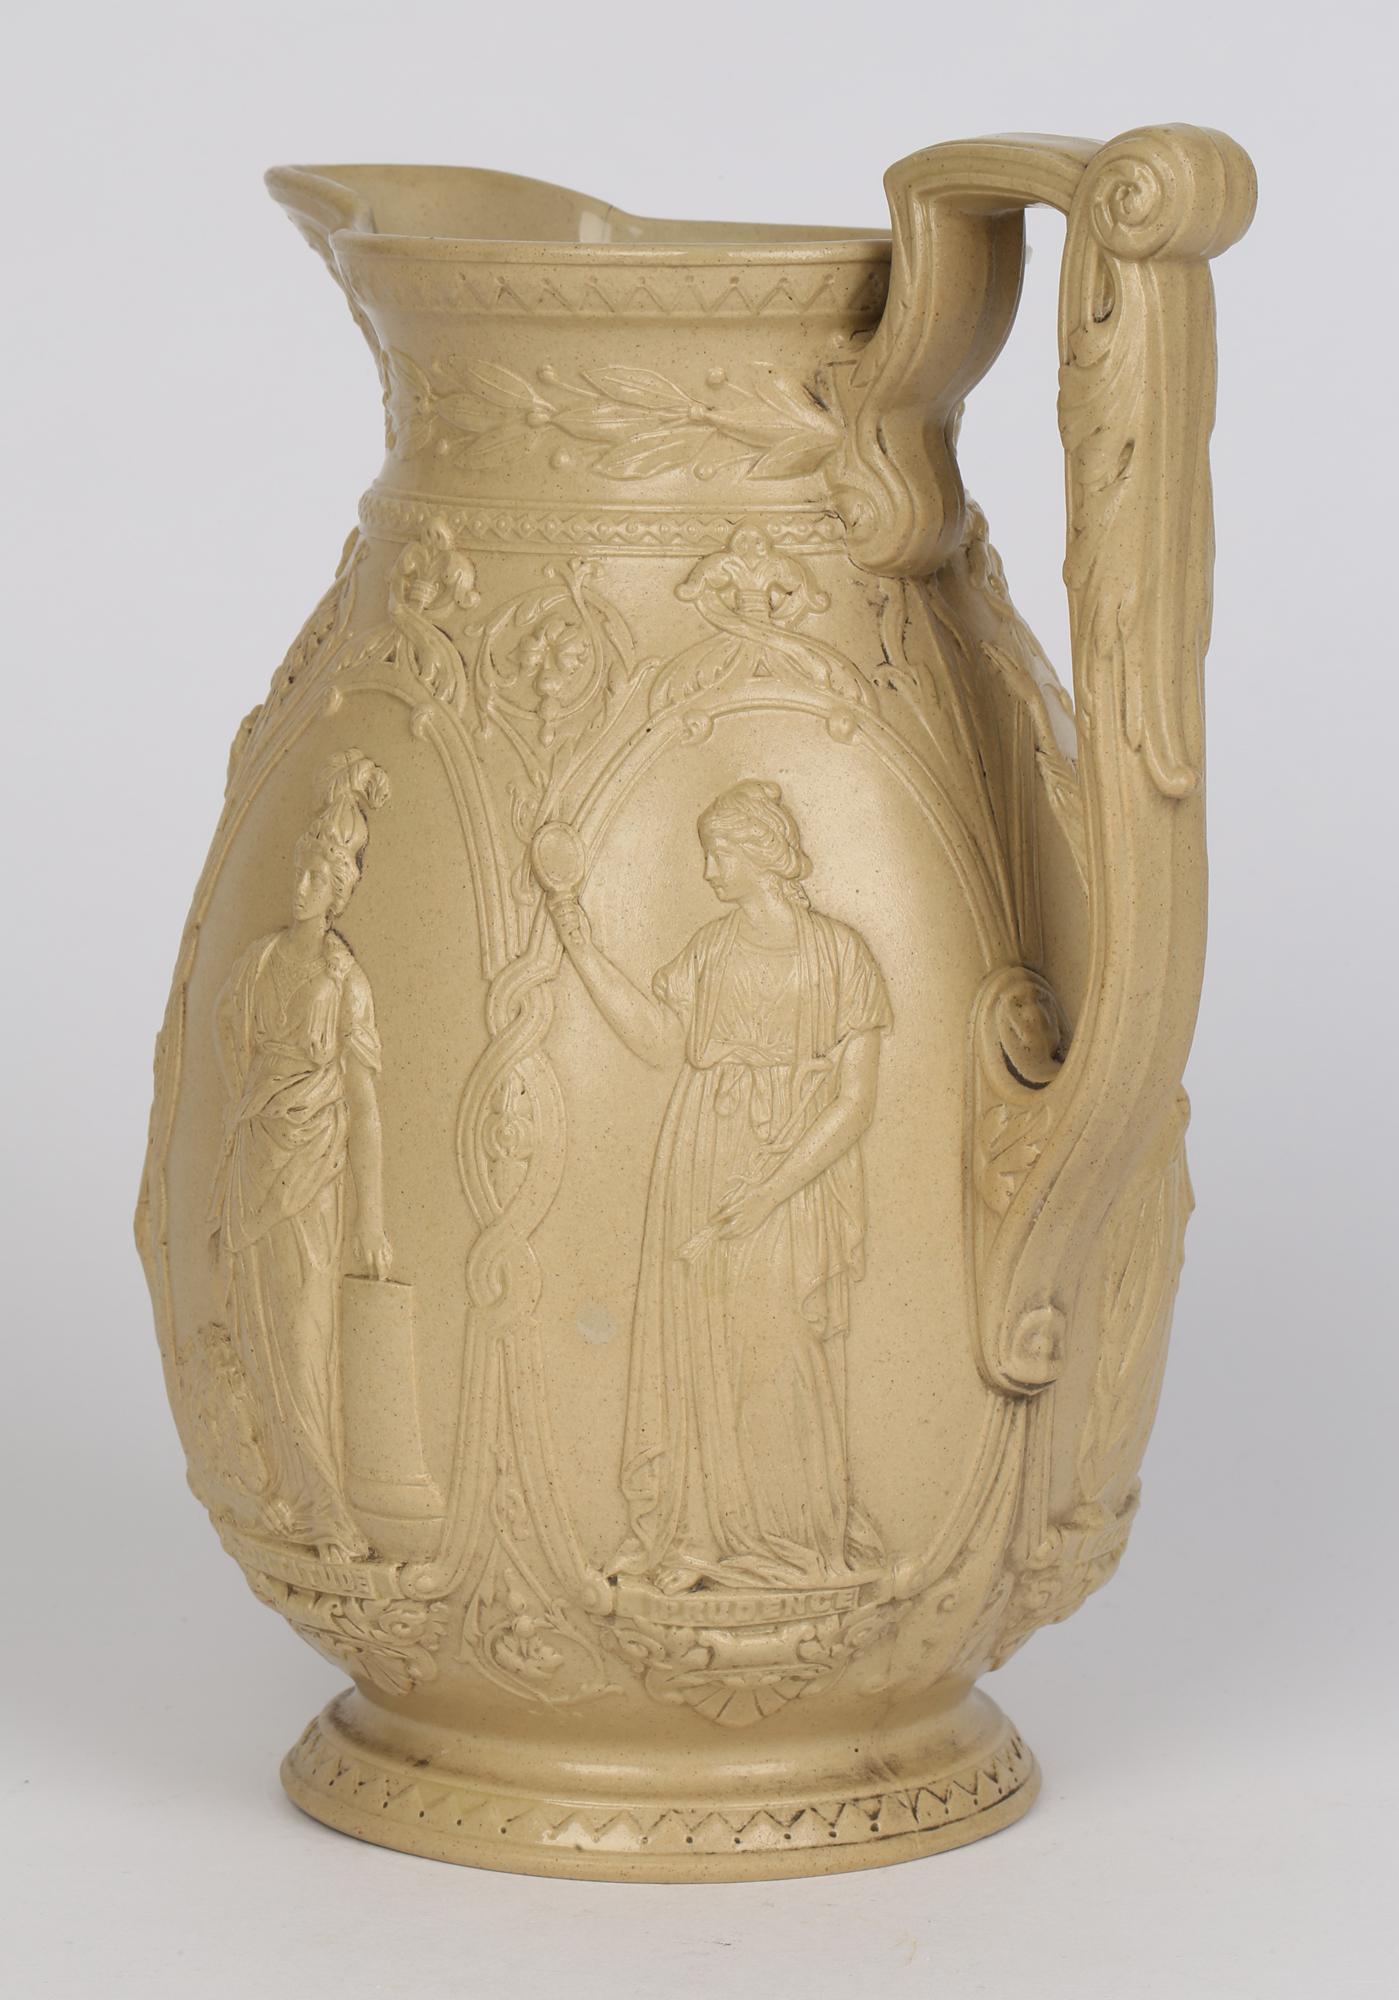 Old Hall Drabware Ceramic Jug with Female Cardinal Virtues Figures For Sale 1